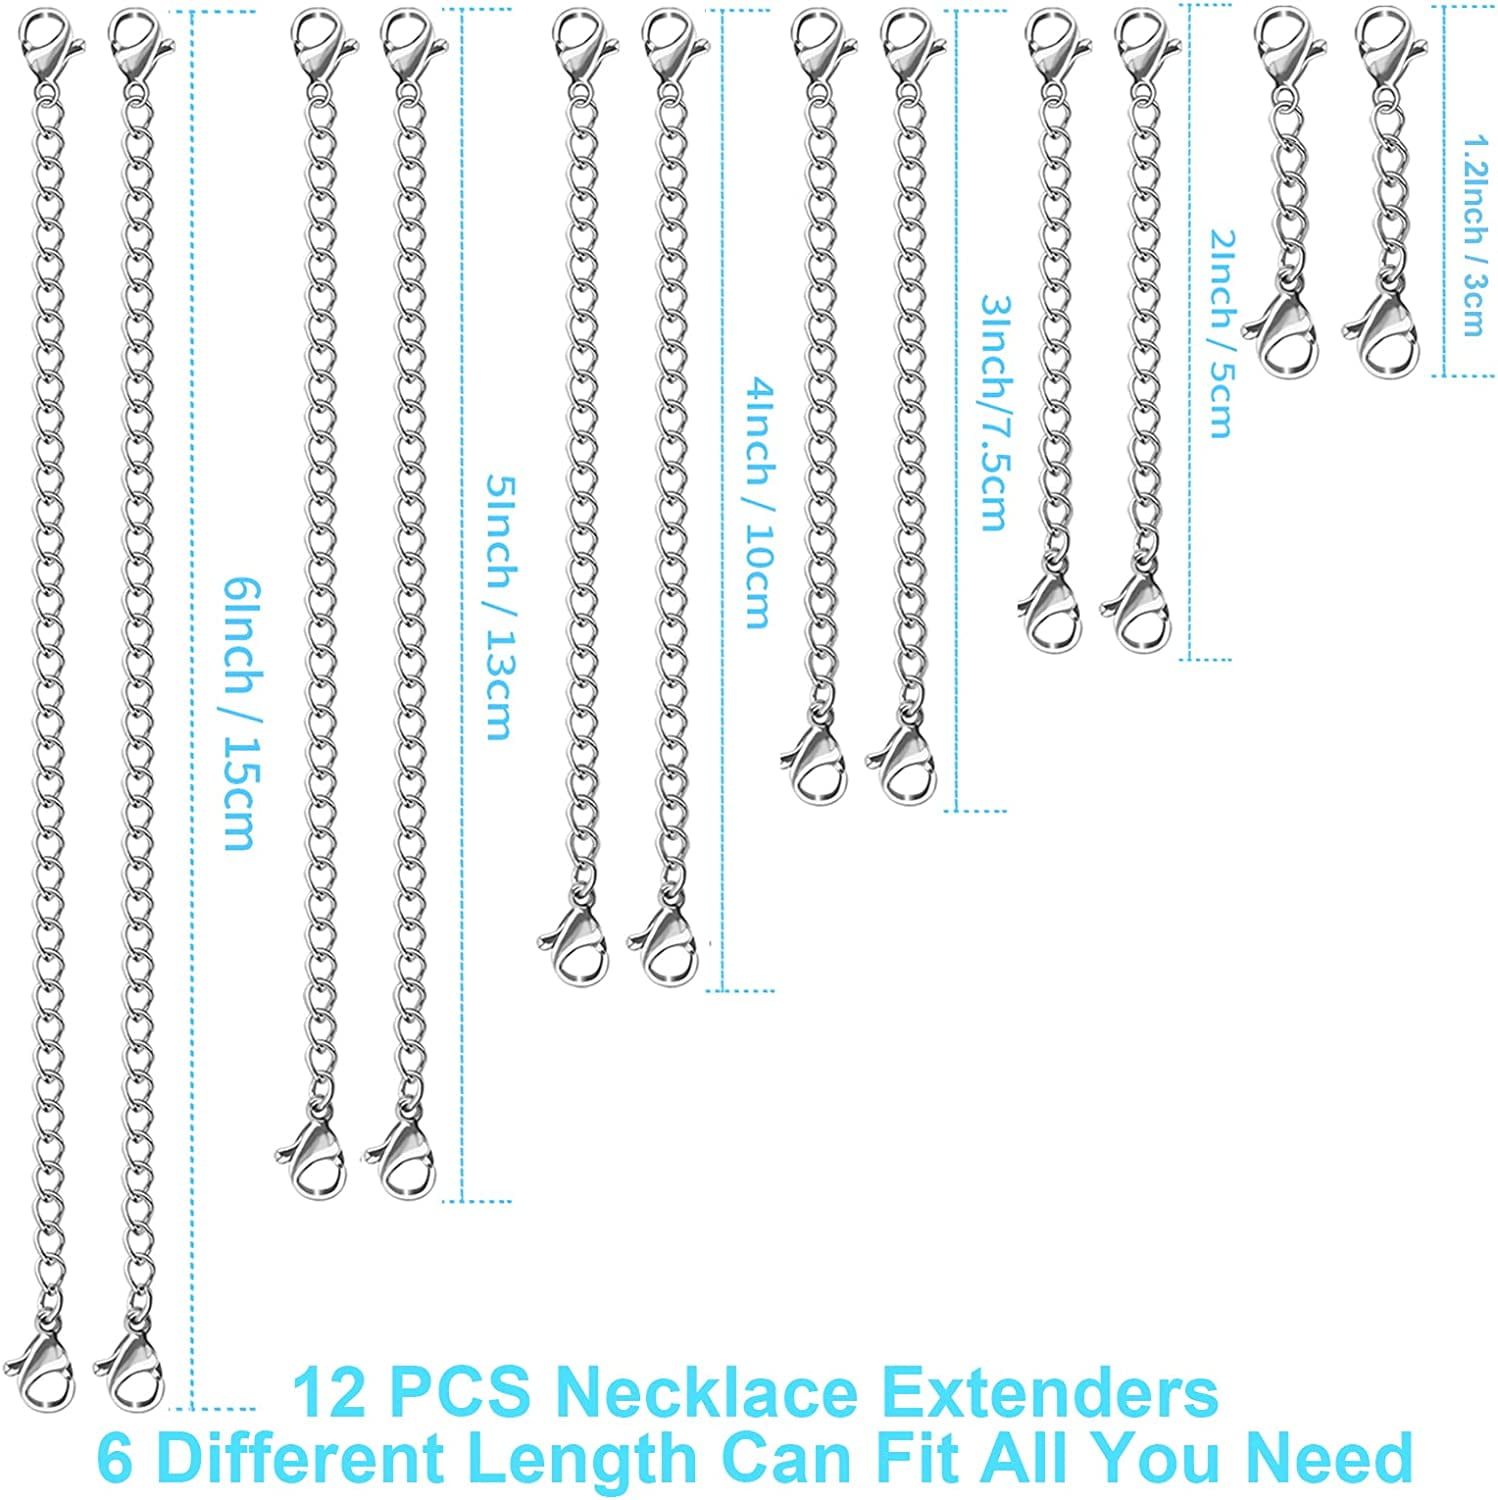 Jewelry Extenders for Necklaces, Anezus 12pcs Necklace Extenders, Chain  Extenders for Necklace, Bracelet and Jewelry Making (Assorted Sizes &  Colors)